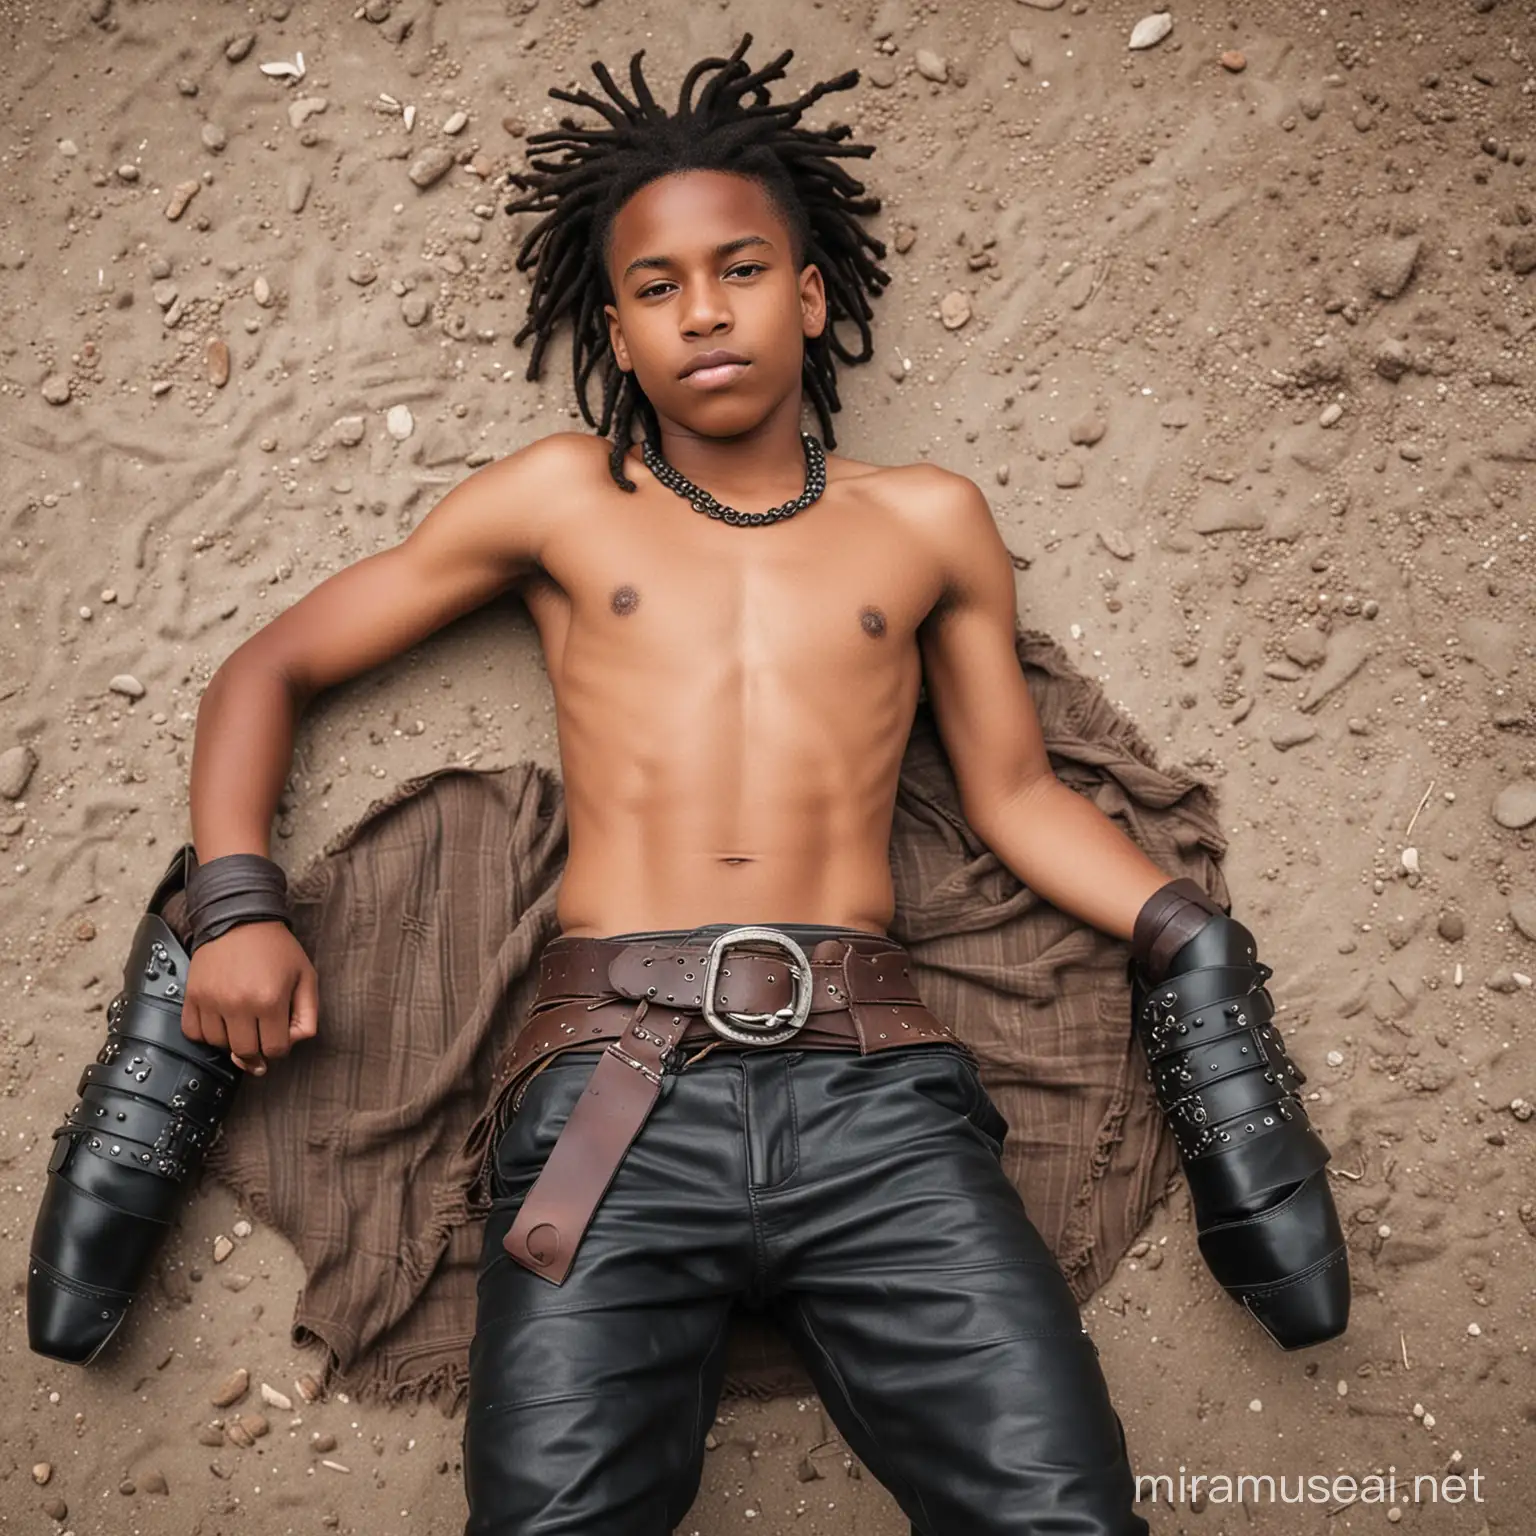 A very young black shirtless teenage boy warrior with dreadlocks, wearing a very short loincloth, a big leather belt and boots, lying on the ground.